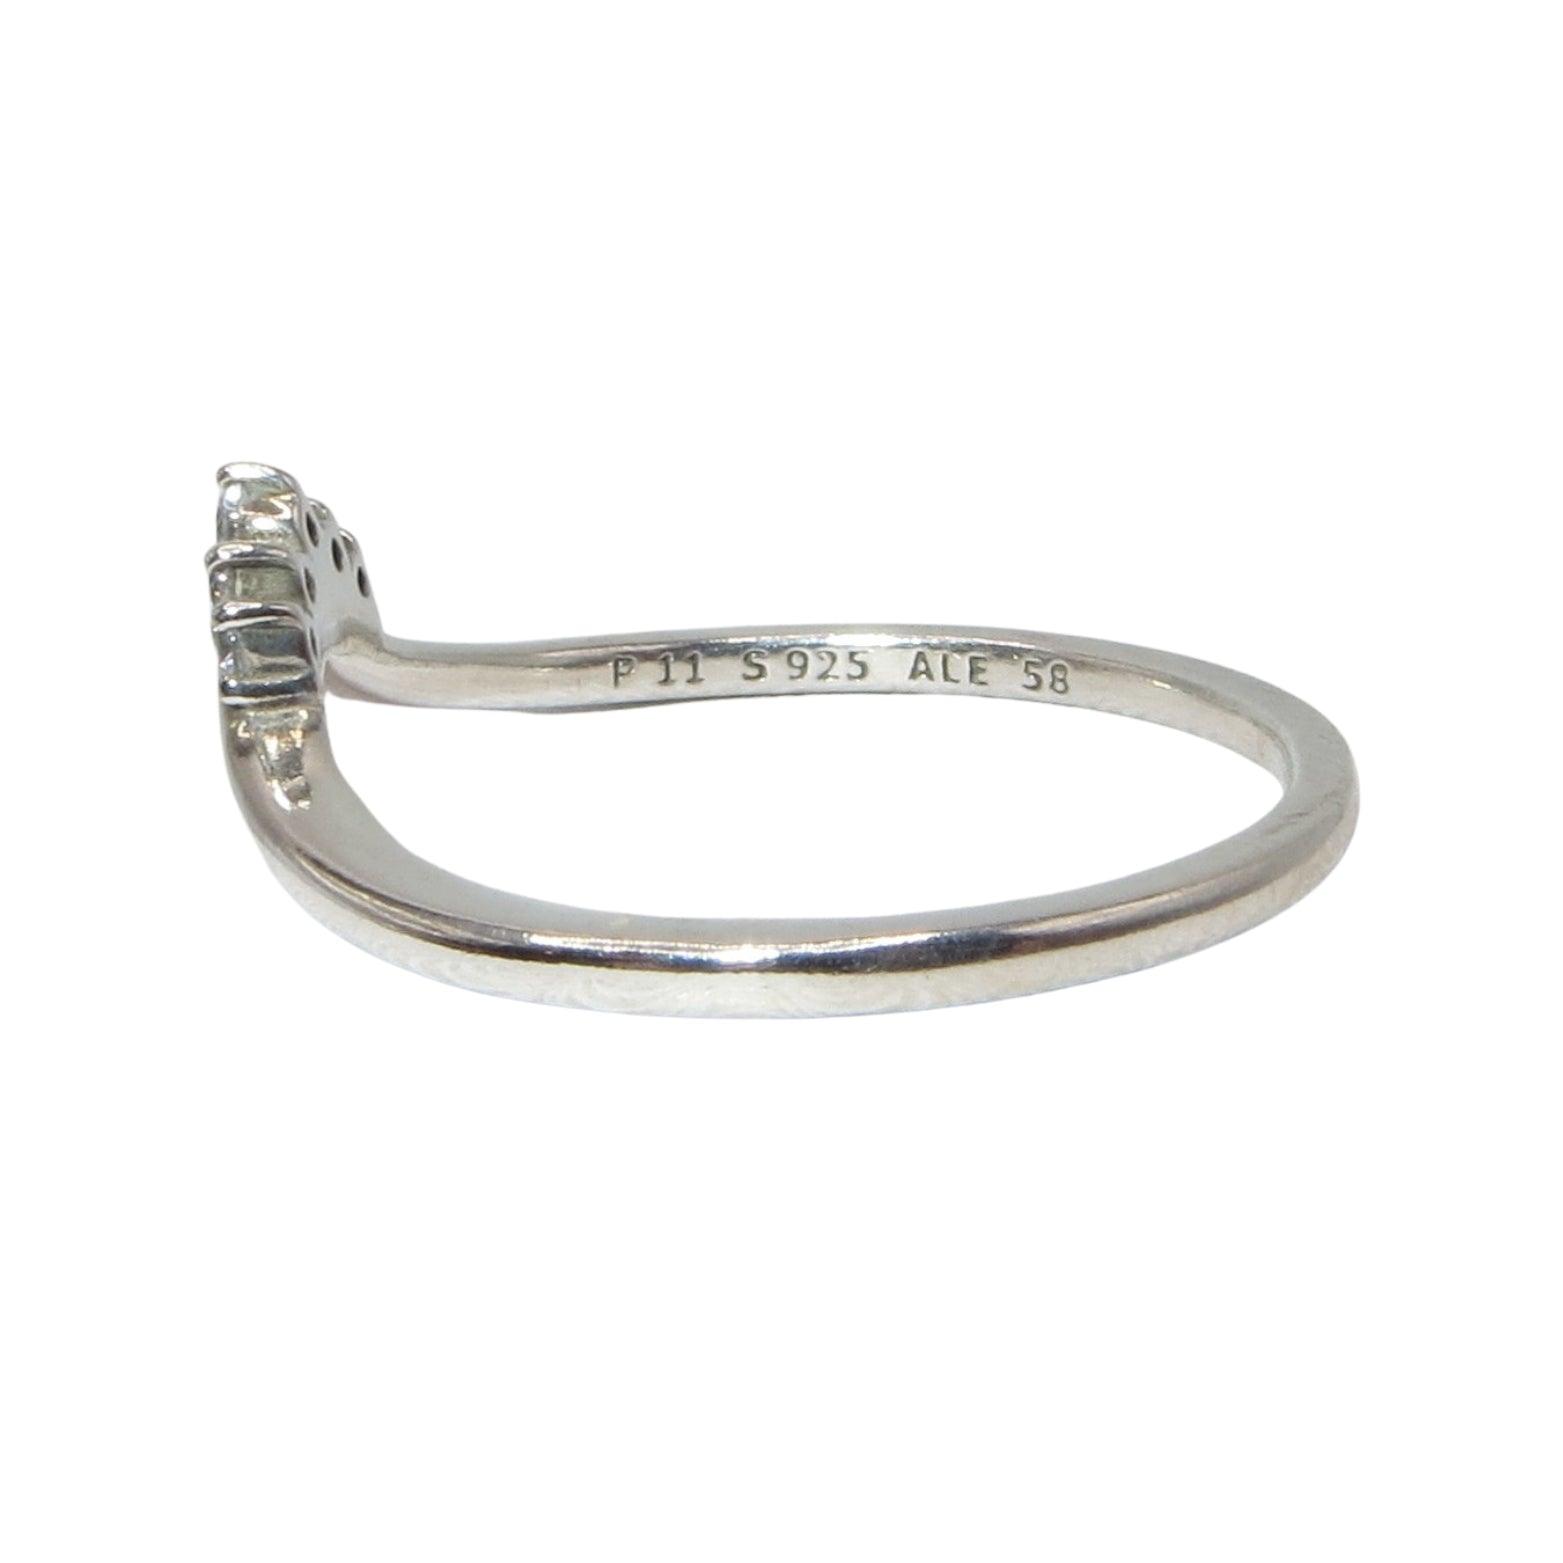 Pandora 198282CZ TIARA WISHBONE CLEAR CZ and Sterling Silver Stacking Ring.  a wishbone design ring with small clear CZs forming a 'tiara' at the peak of the wishbone.